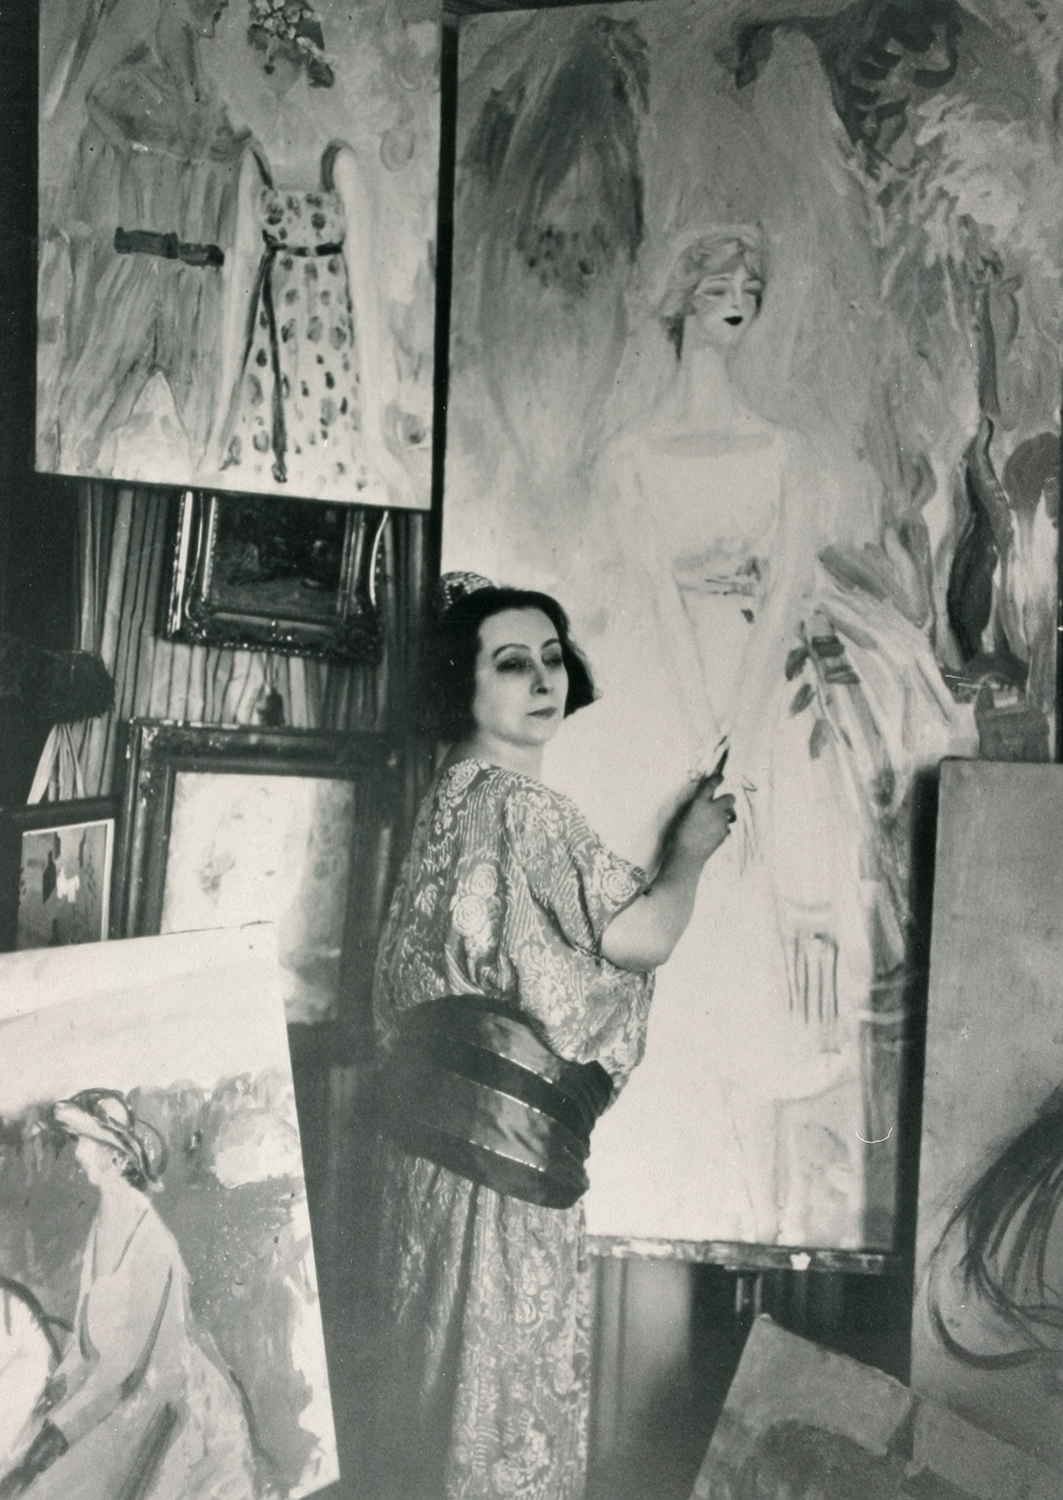 Jacqueline Marval Archives Of Women Artists Research And Exhibitions